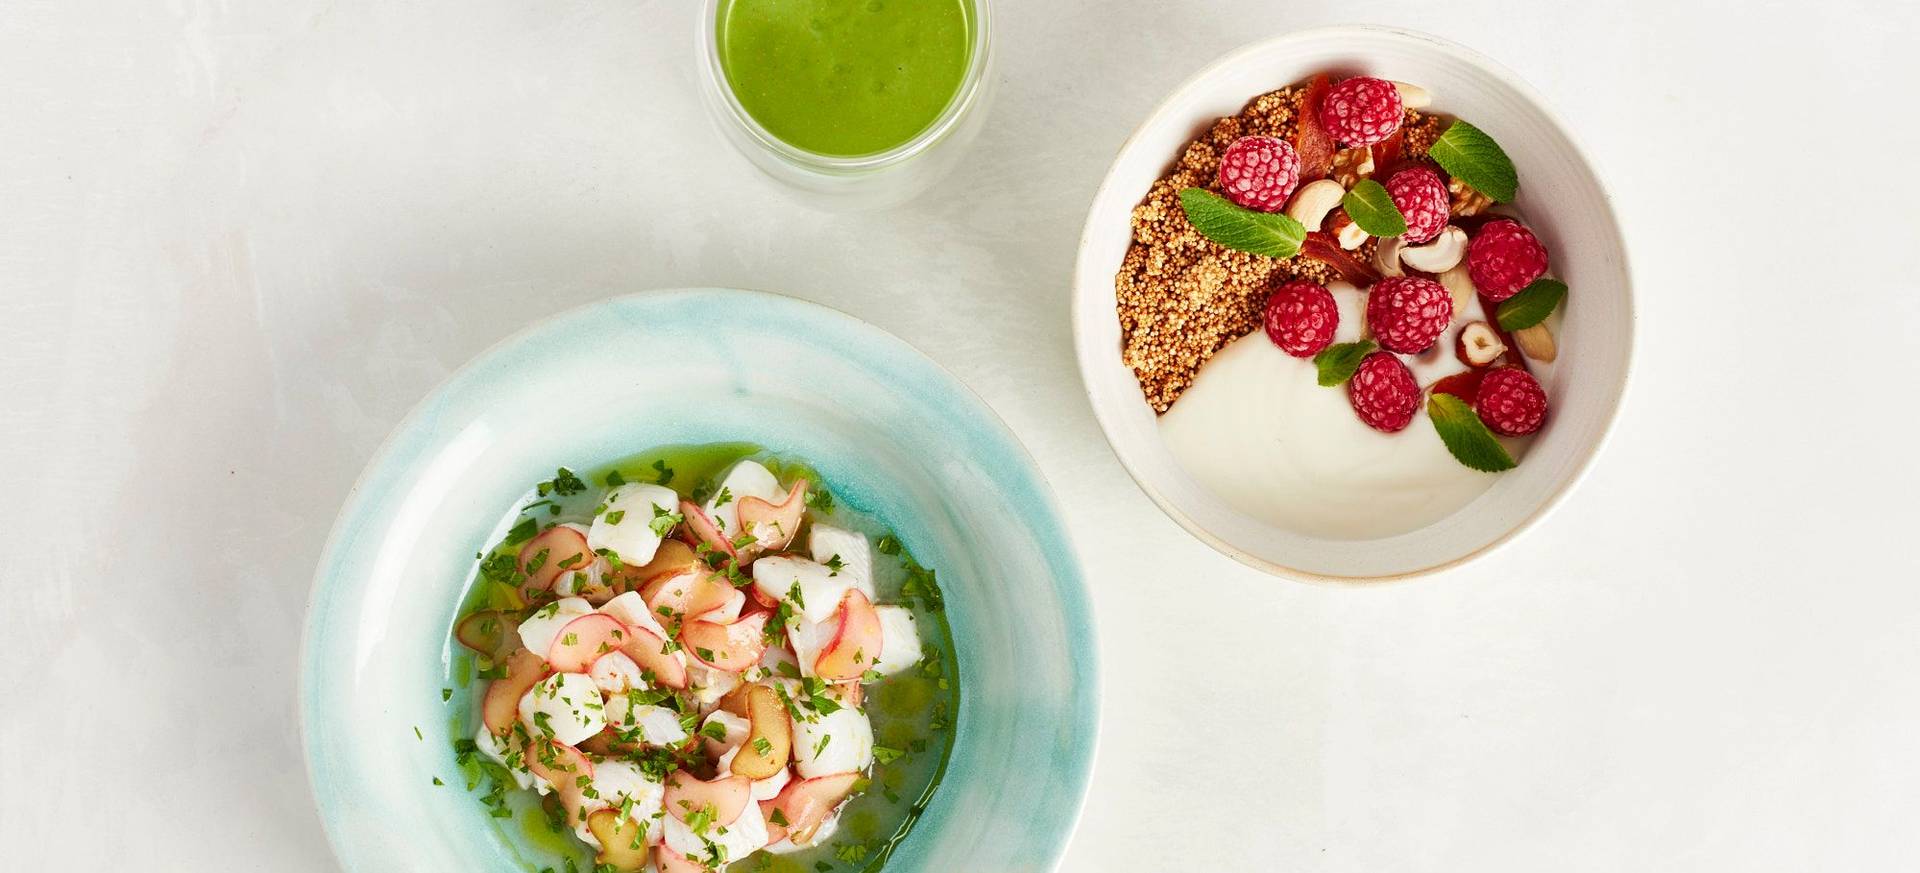 Hangover Breakfast with Sorrel Smoothie, Amaranth Bowl & Rhubarb Ceviche